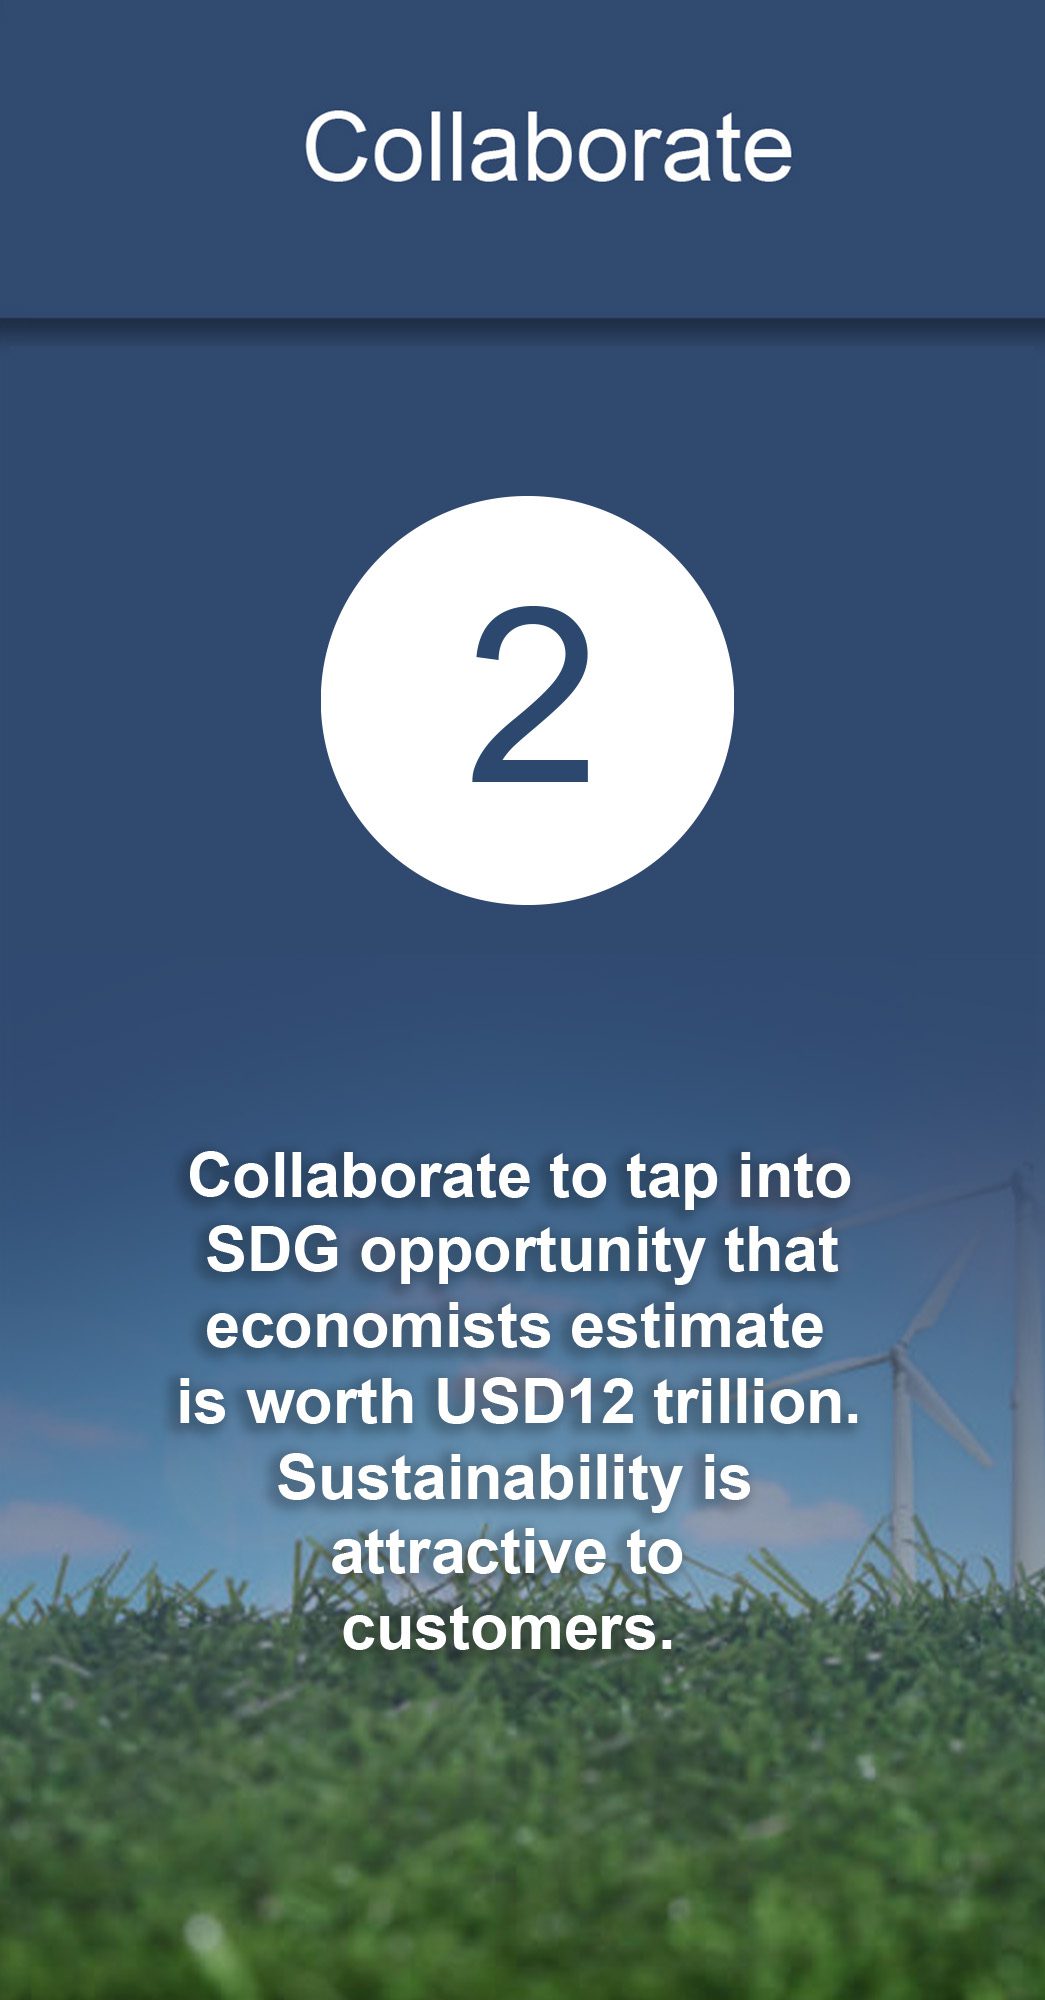 Collaborate to tap into SDG opportunity that economists estimate is worth USD12 trillion. Sustainability is attractive to customers.